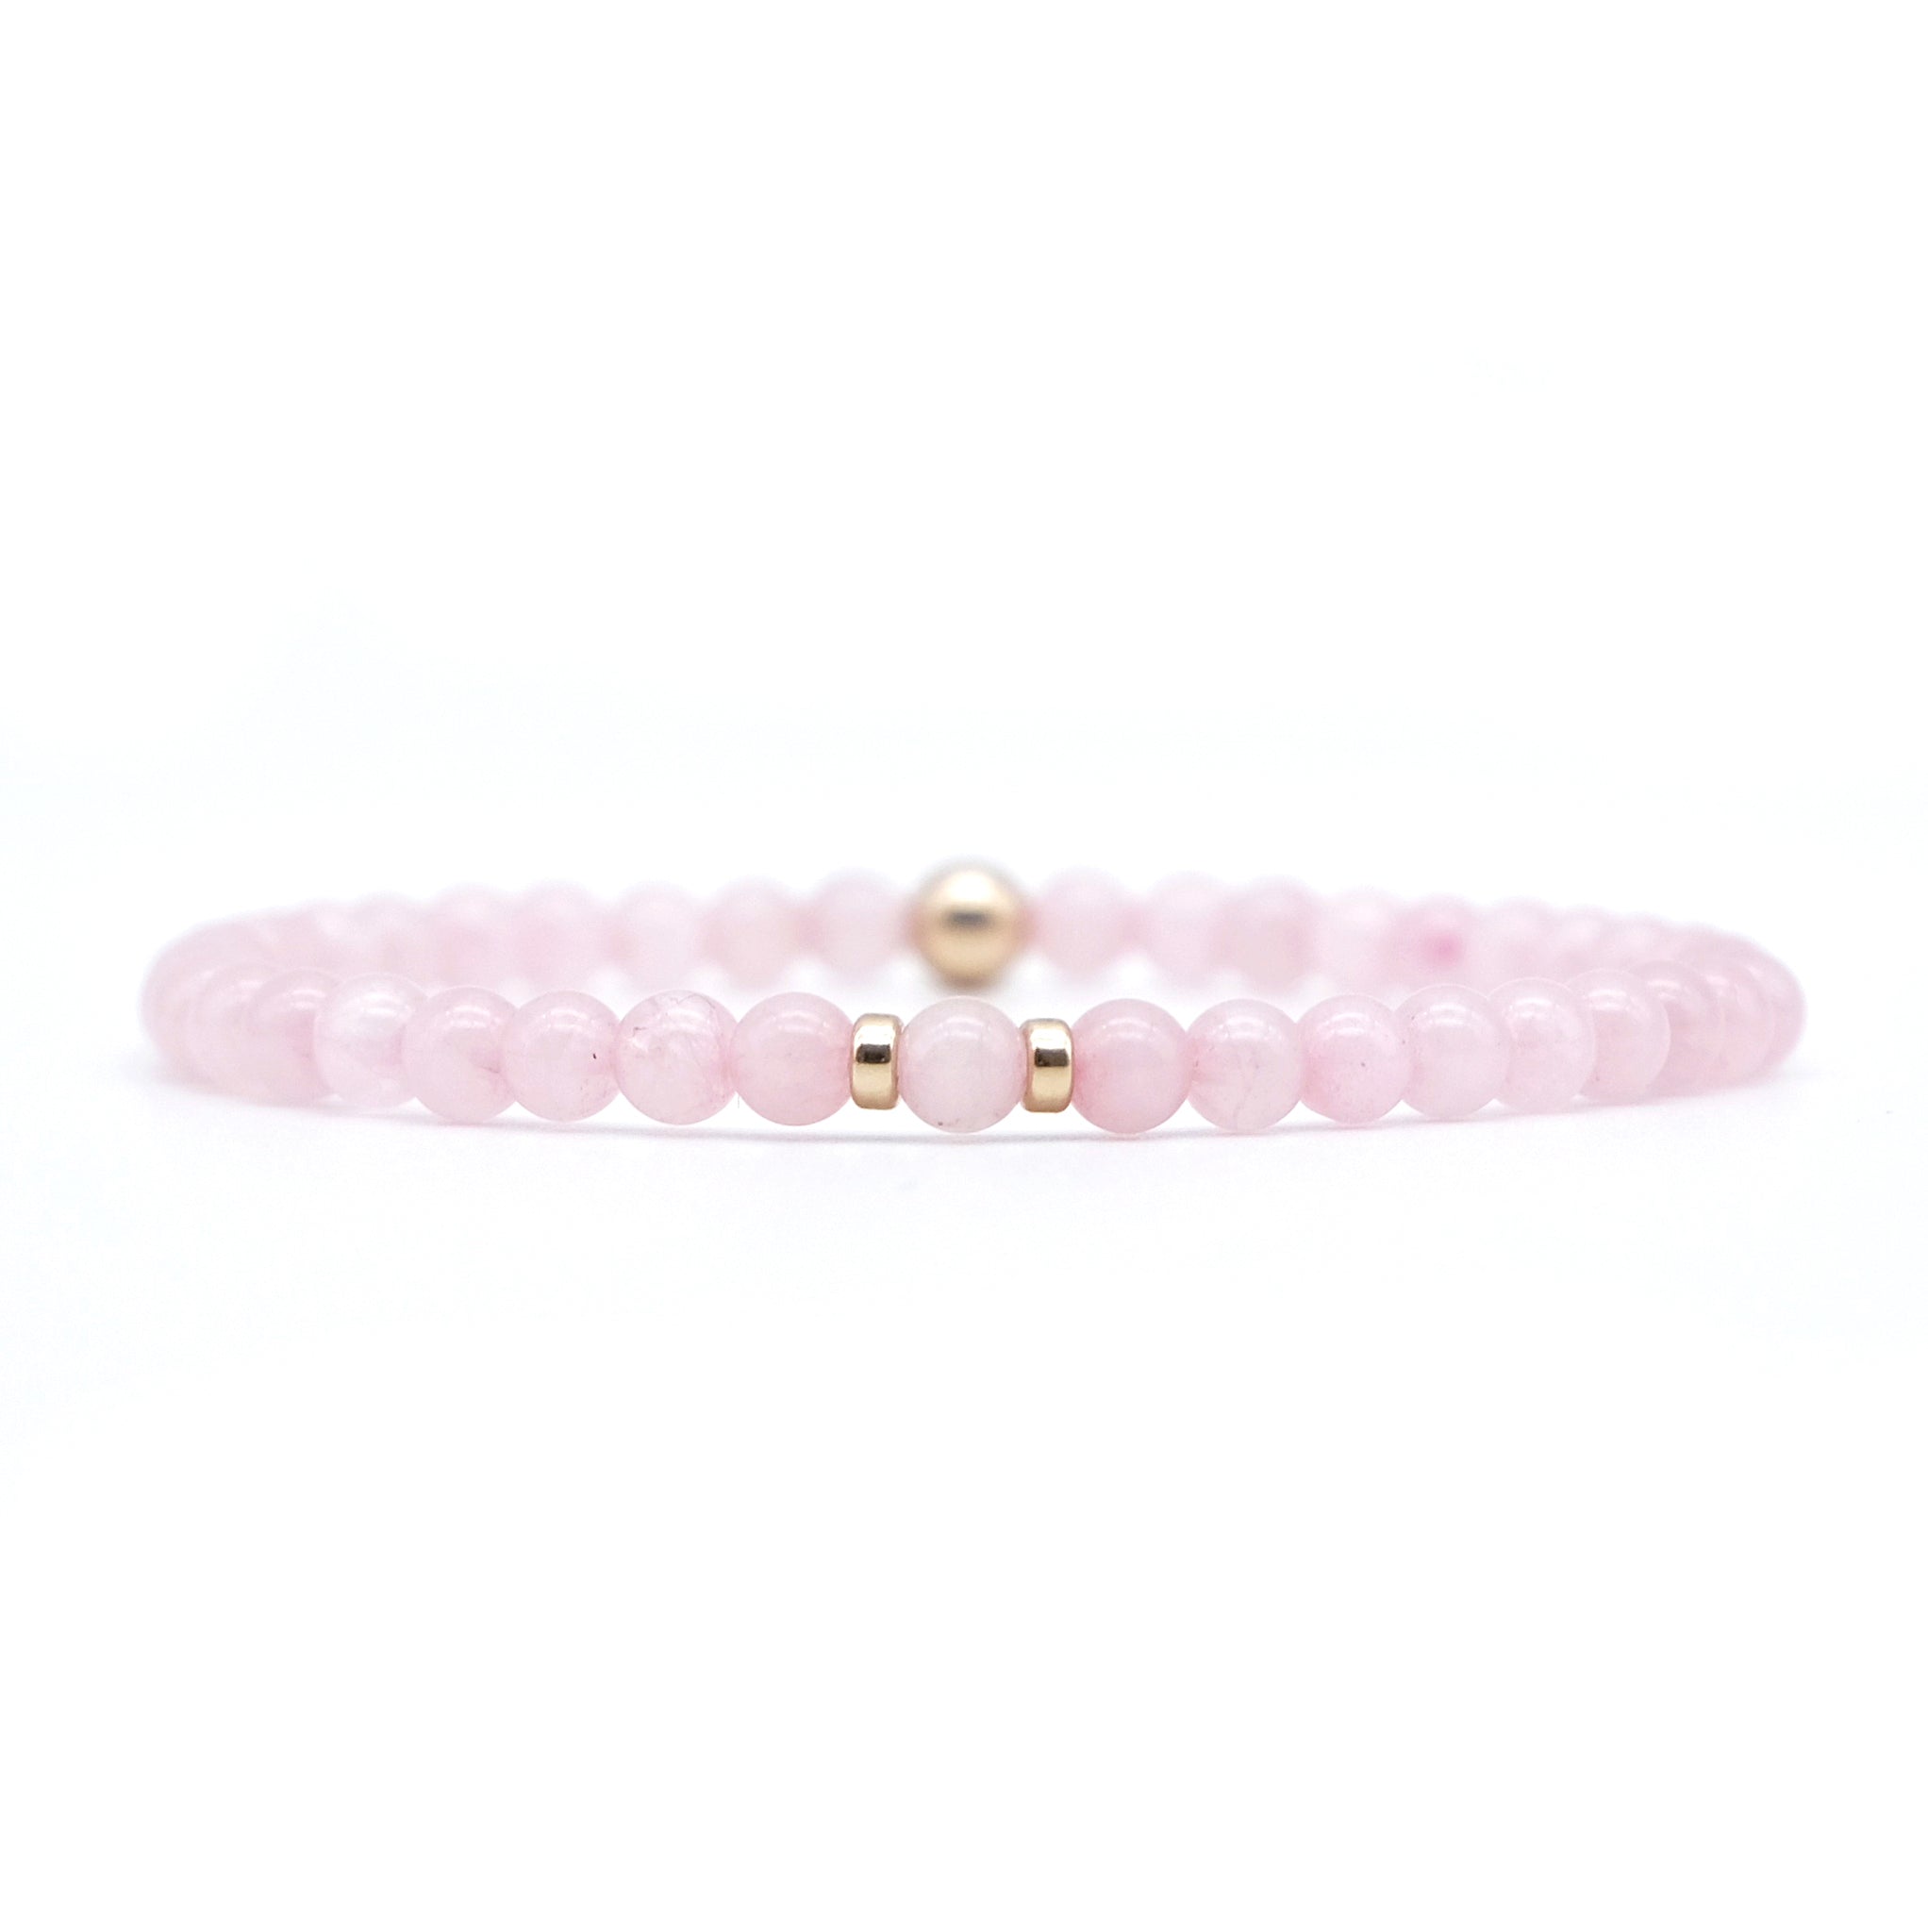 A rose quartz gemstone bracelet in 4mm beads with gold filled accessories